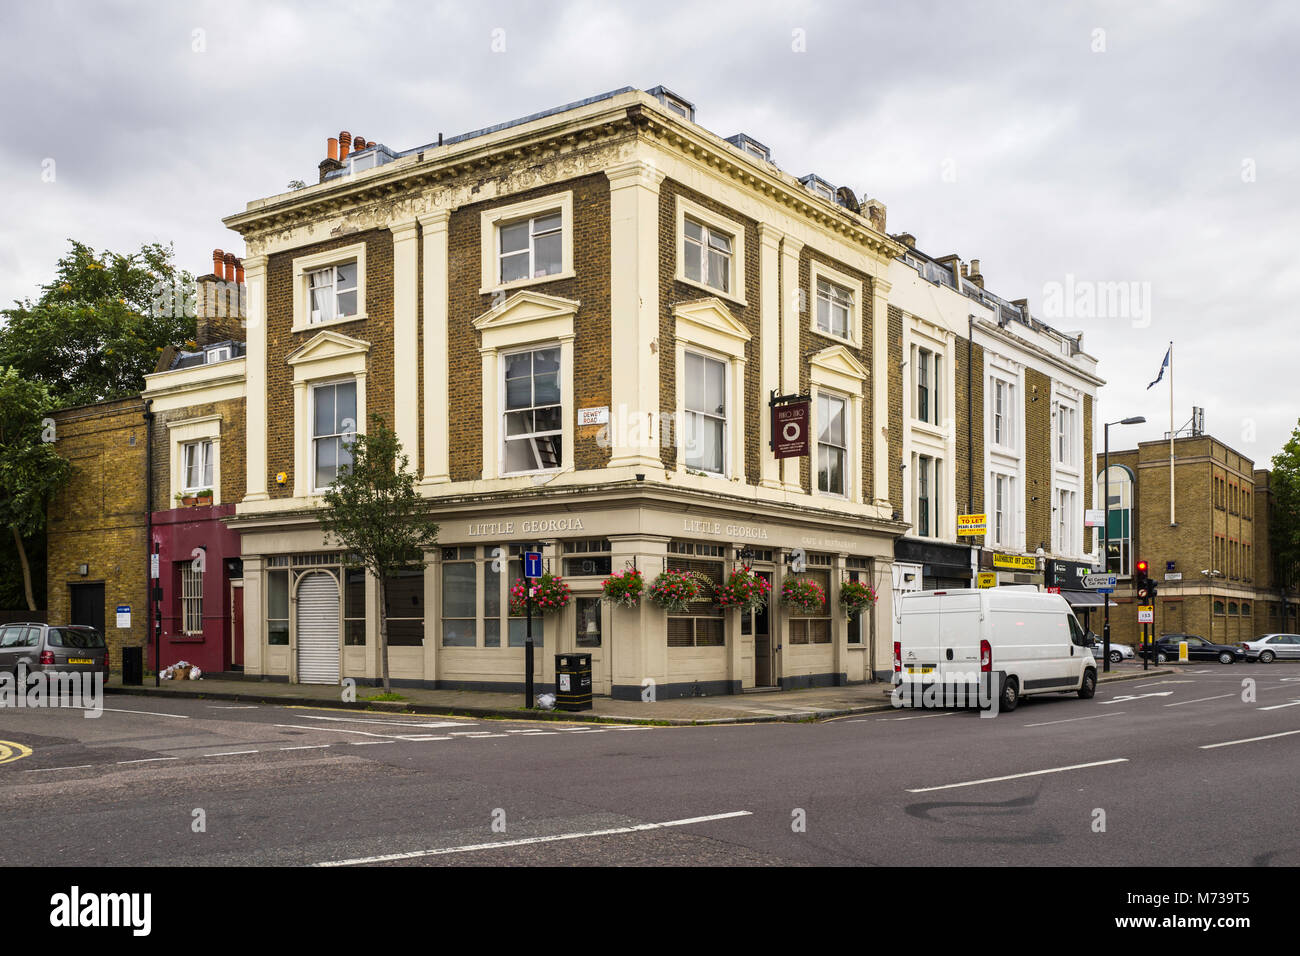 Little Georgia restaurant is in a building that was formerly the White Conduit House, headquarters of the historic cricket club, White Conduit Club. Stock Photo